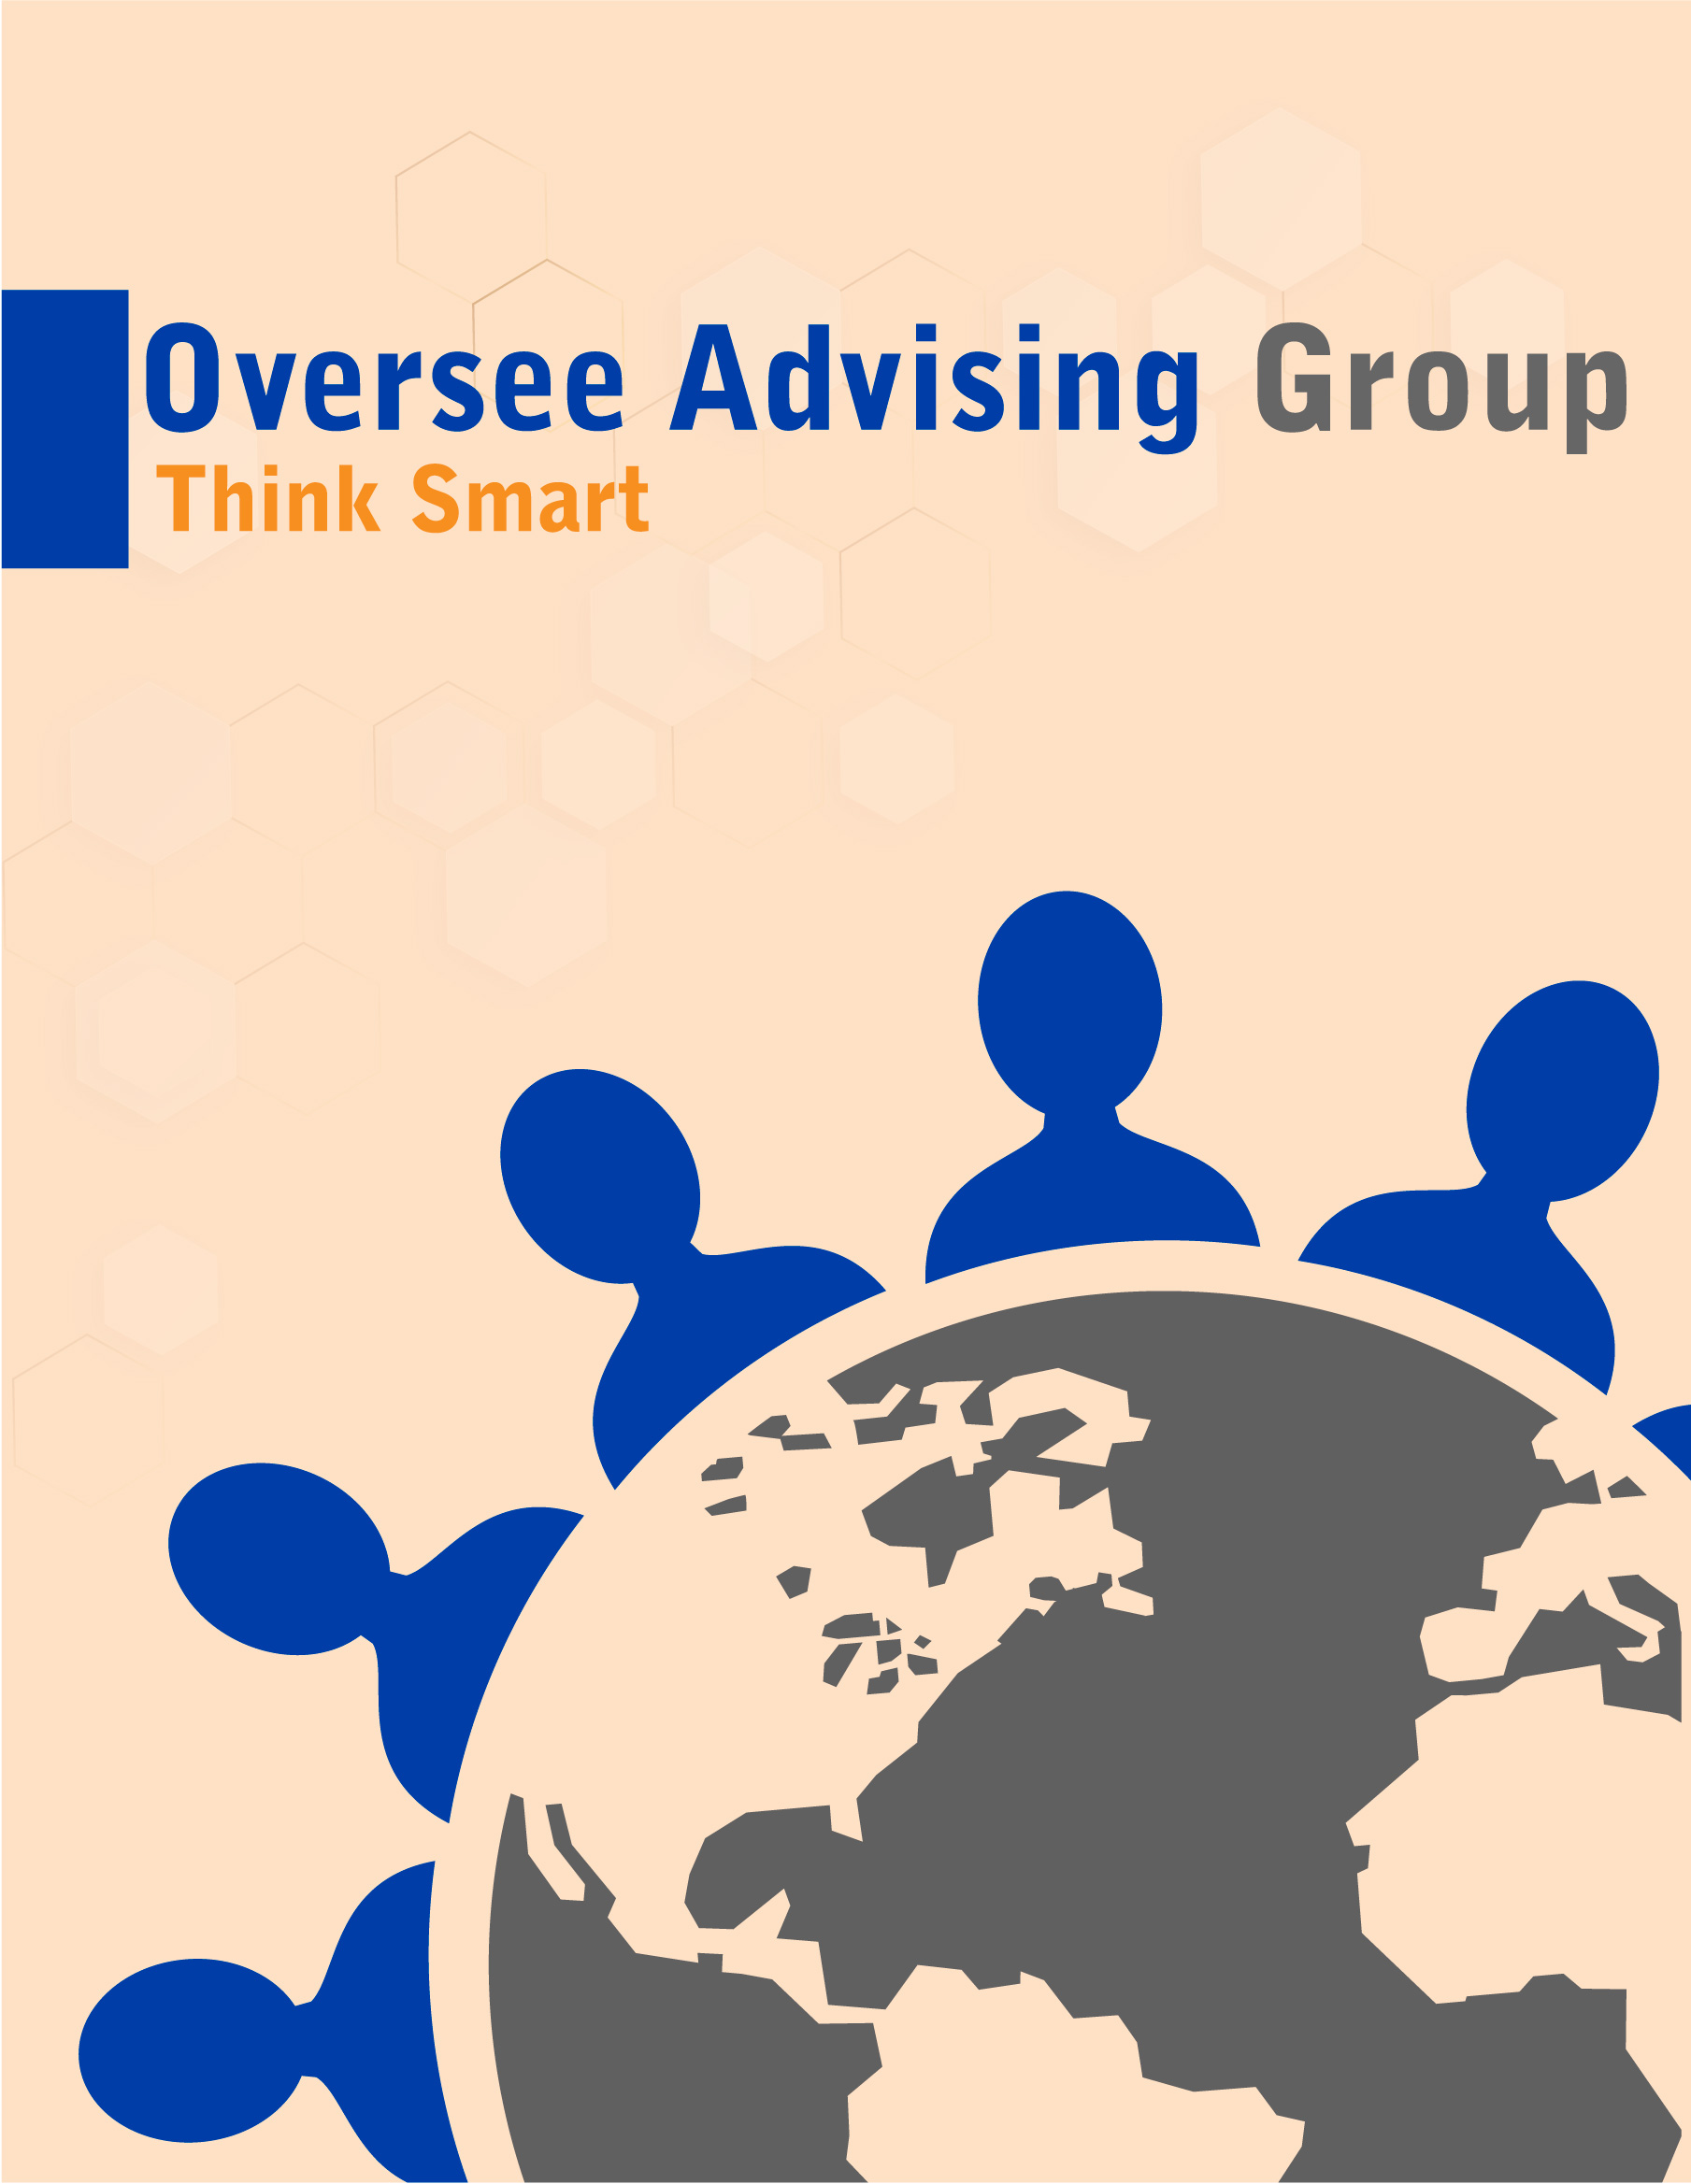 Oversee Advising Group